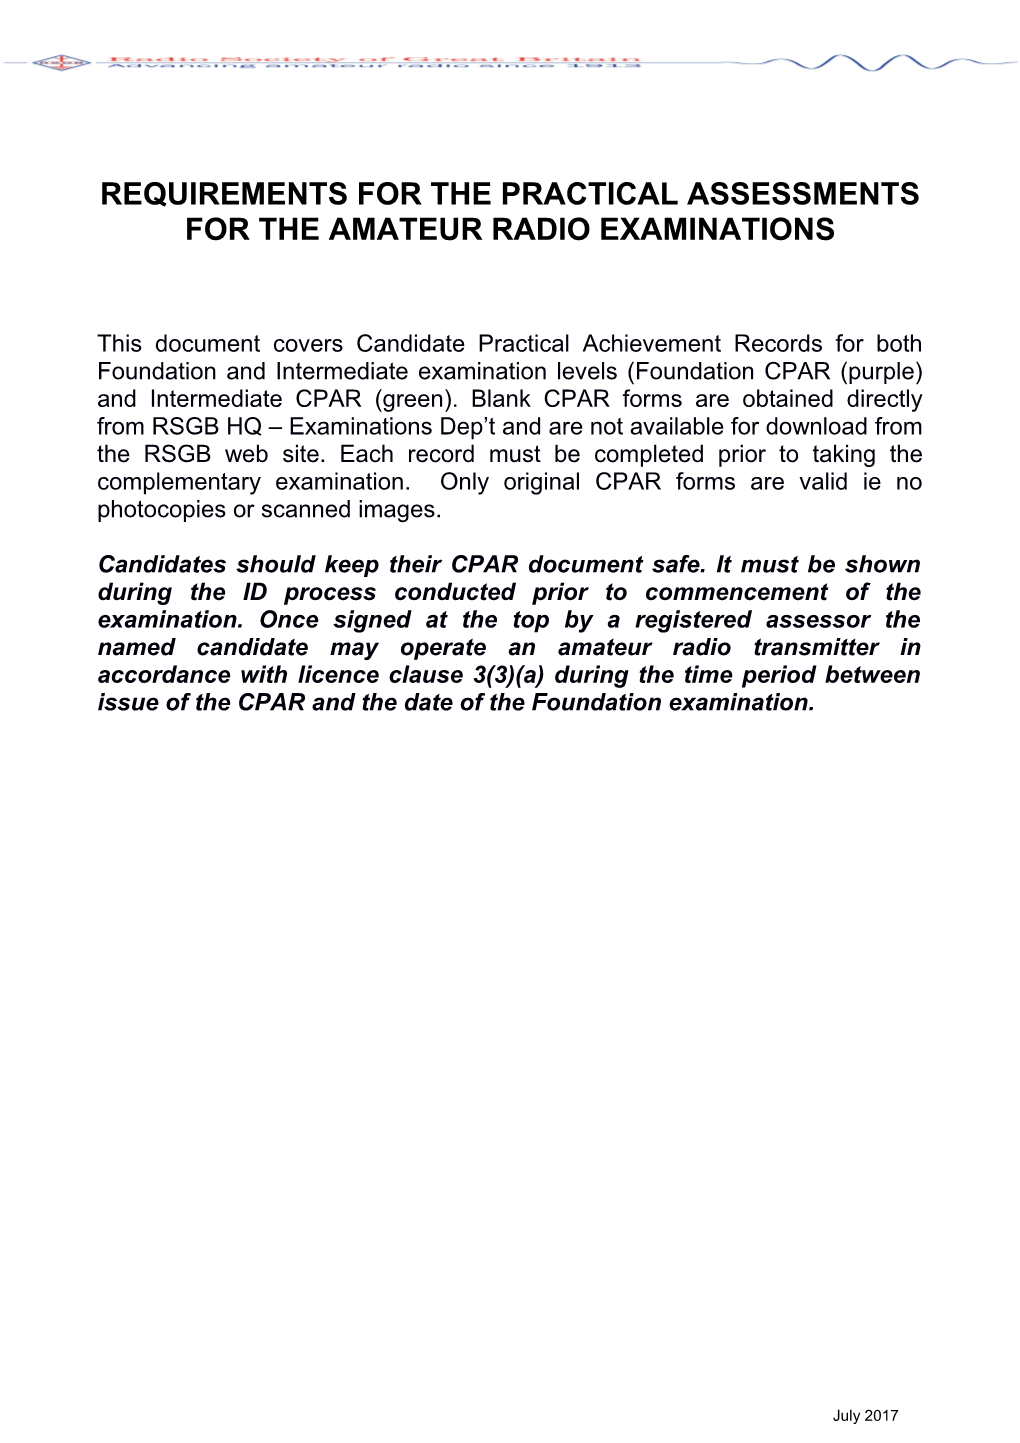 Requirements for the PRACTICAL ASSESSMENTS for the AMATEUR Radio Examinations